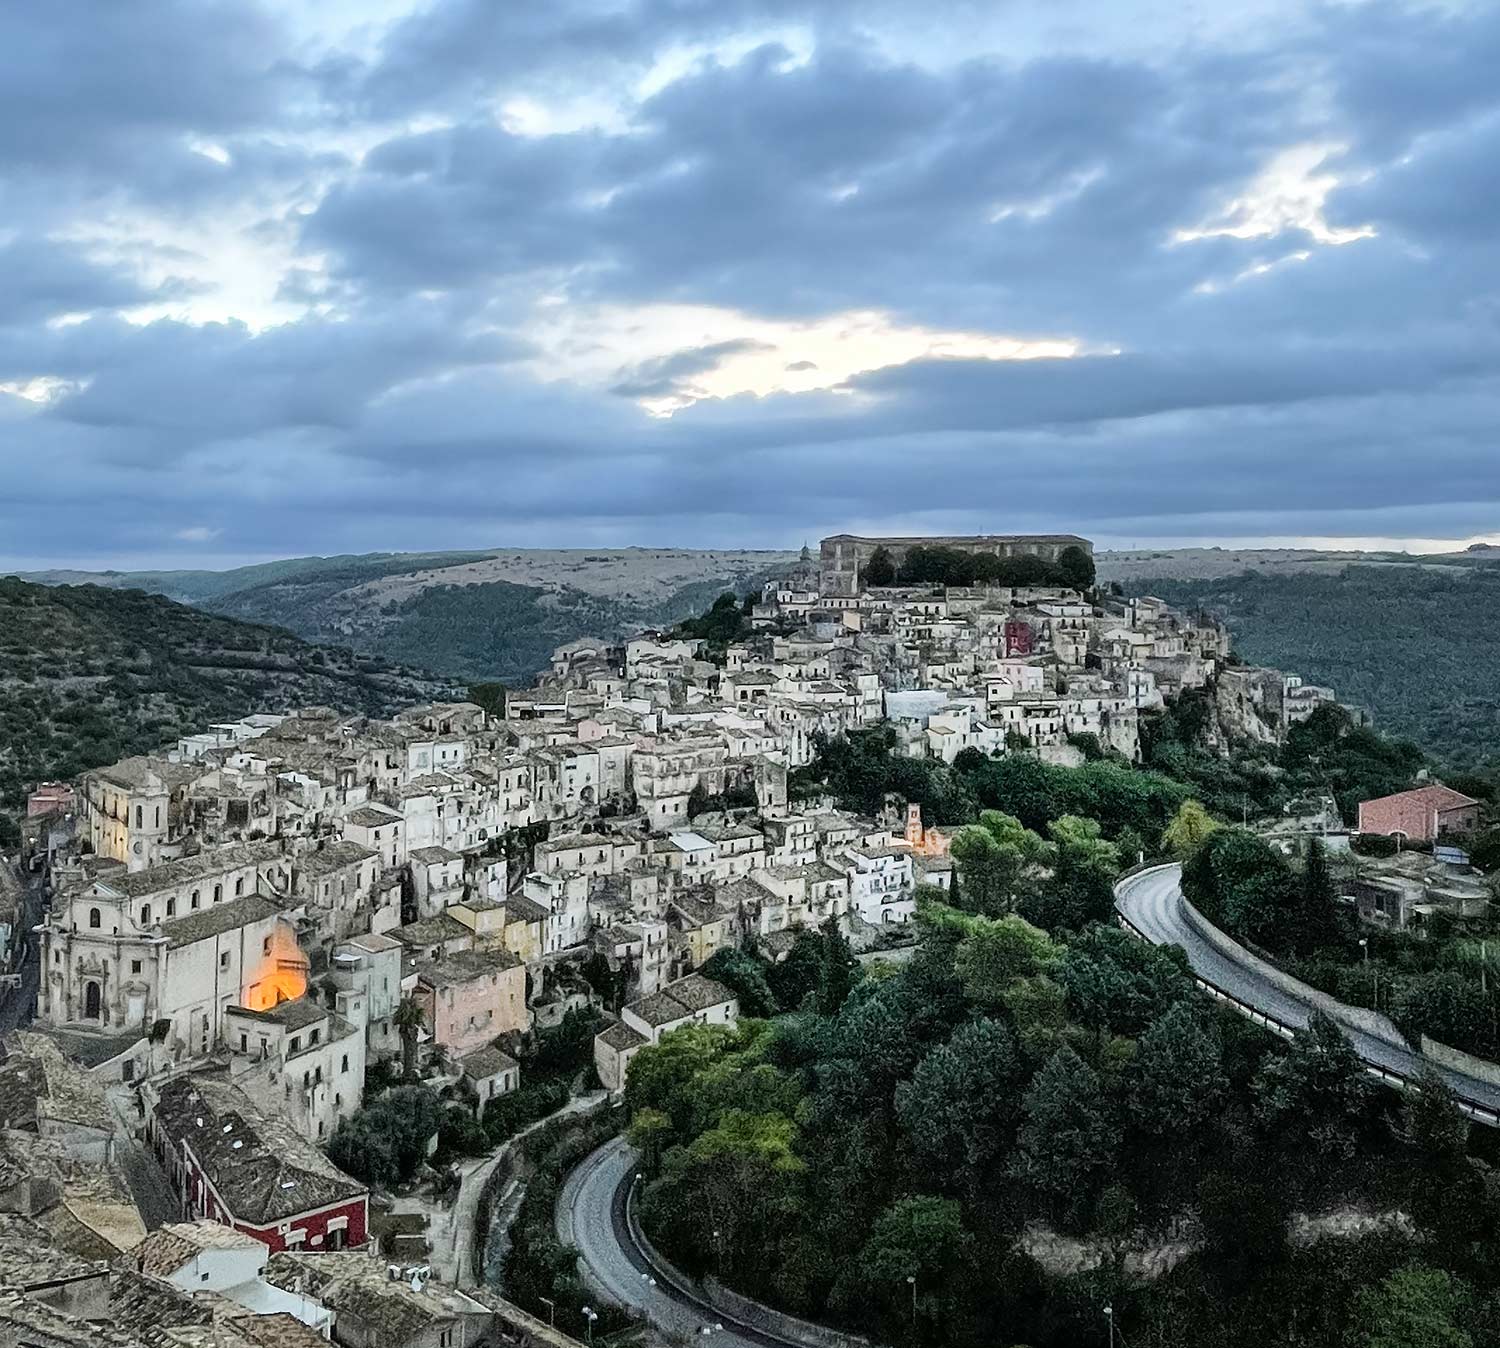 Pretty Hotels: Where to Go, Stay and Eat in Sicily (Image 11)